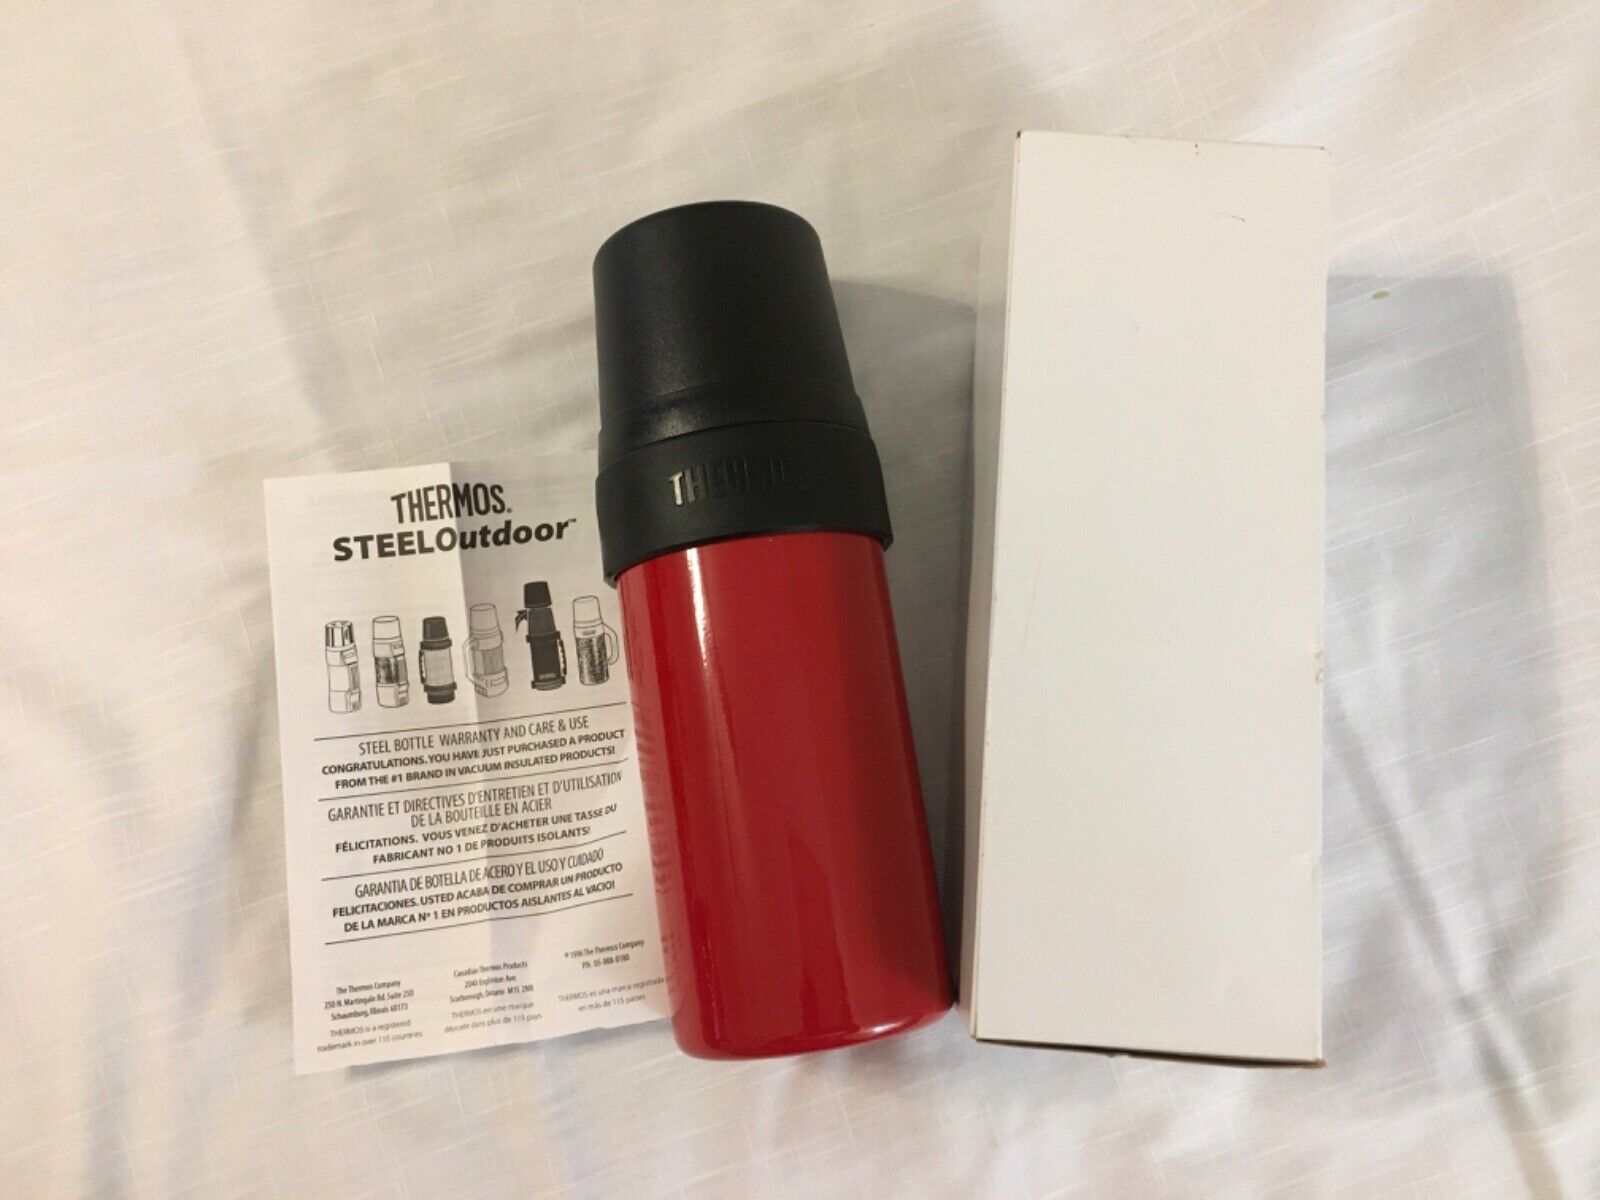 New THERMOS Steel Outdoor Vacuum Insulated 1 Quart Bottle Red Black